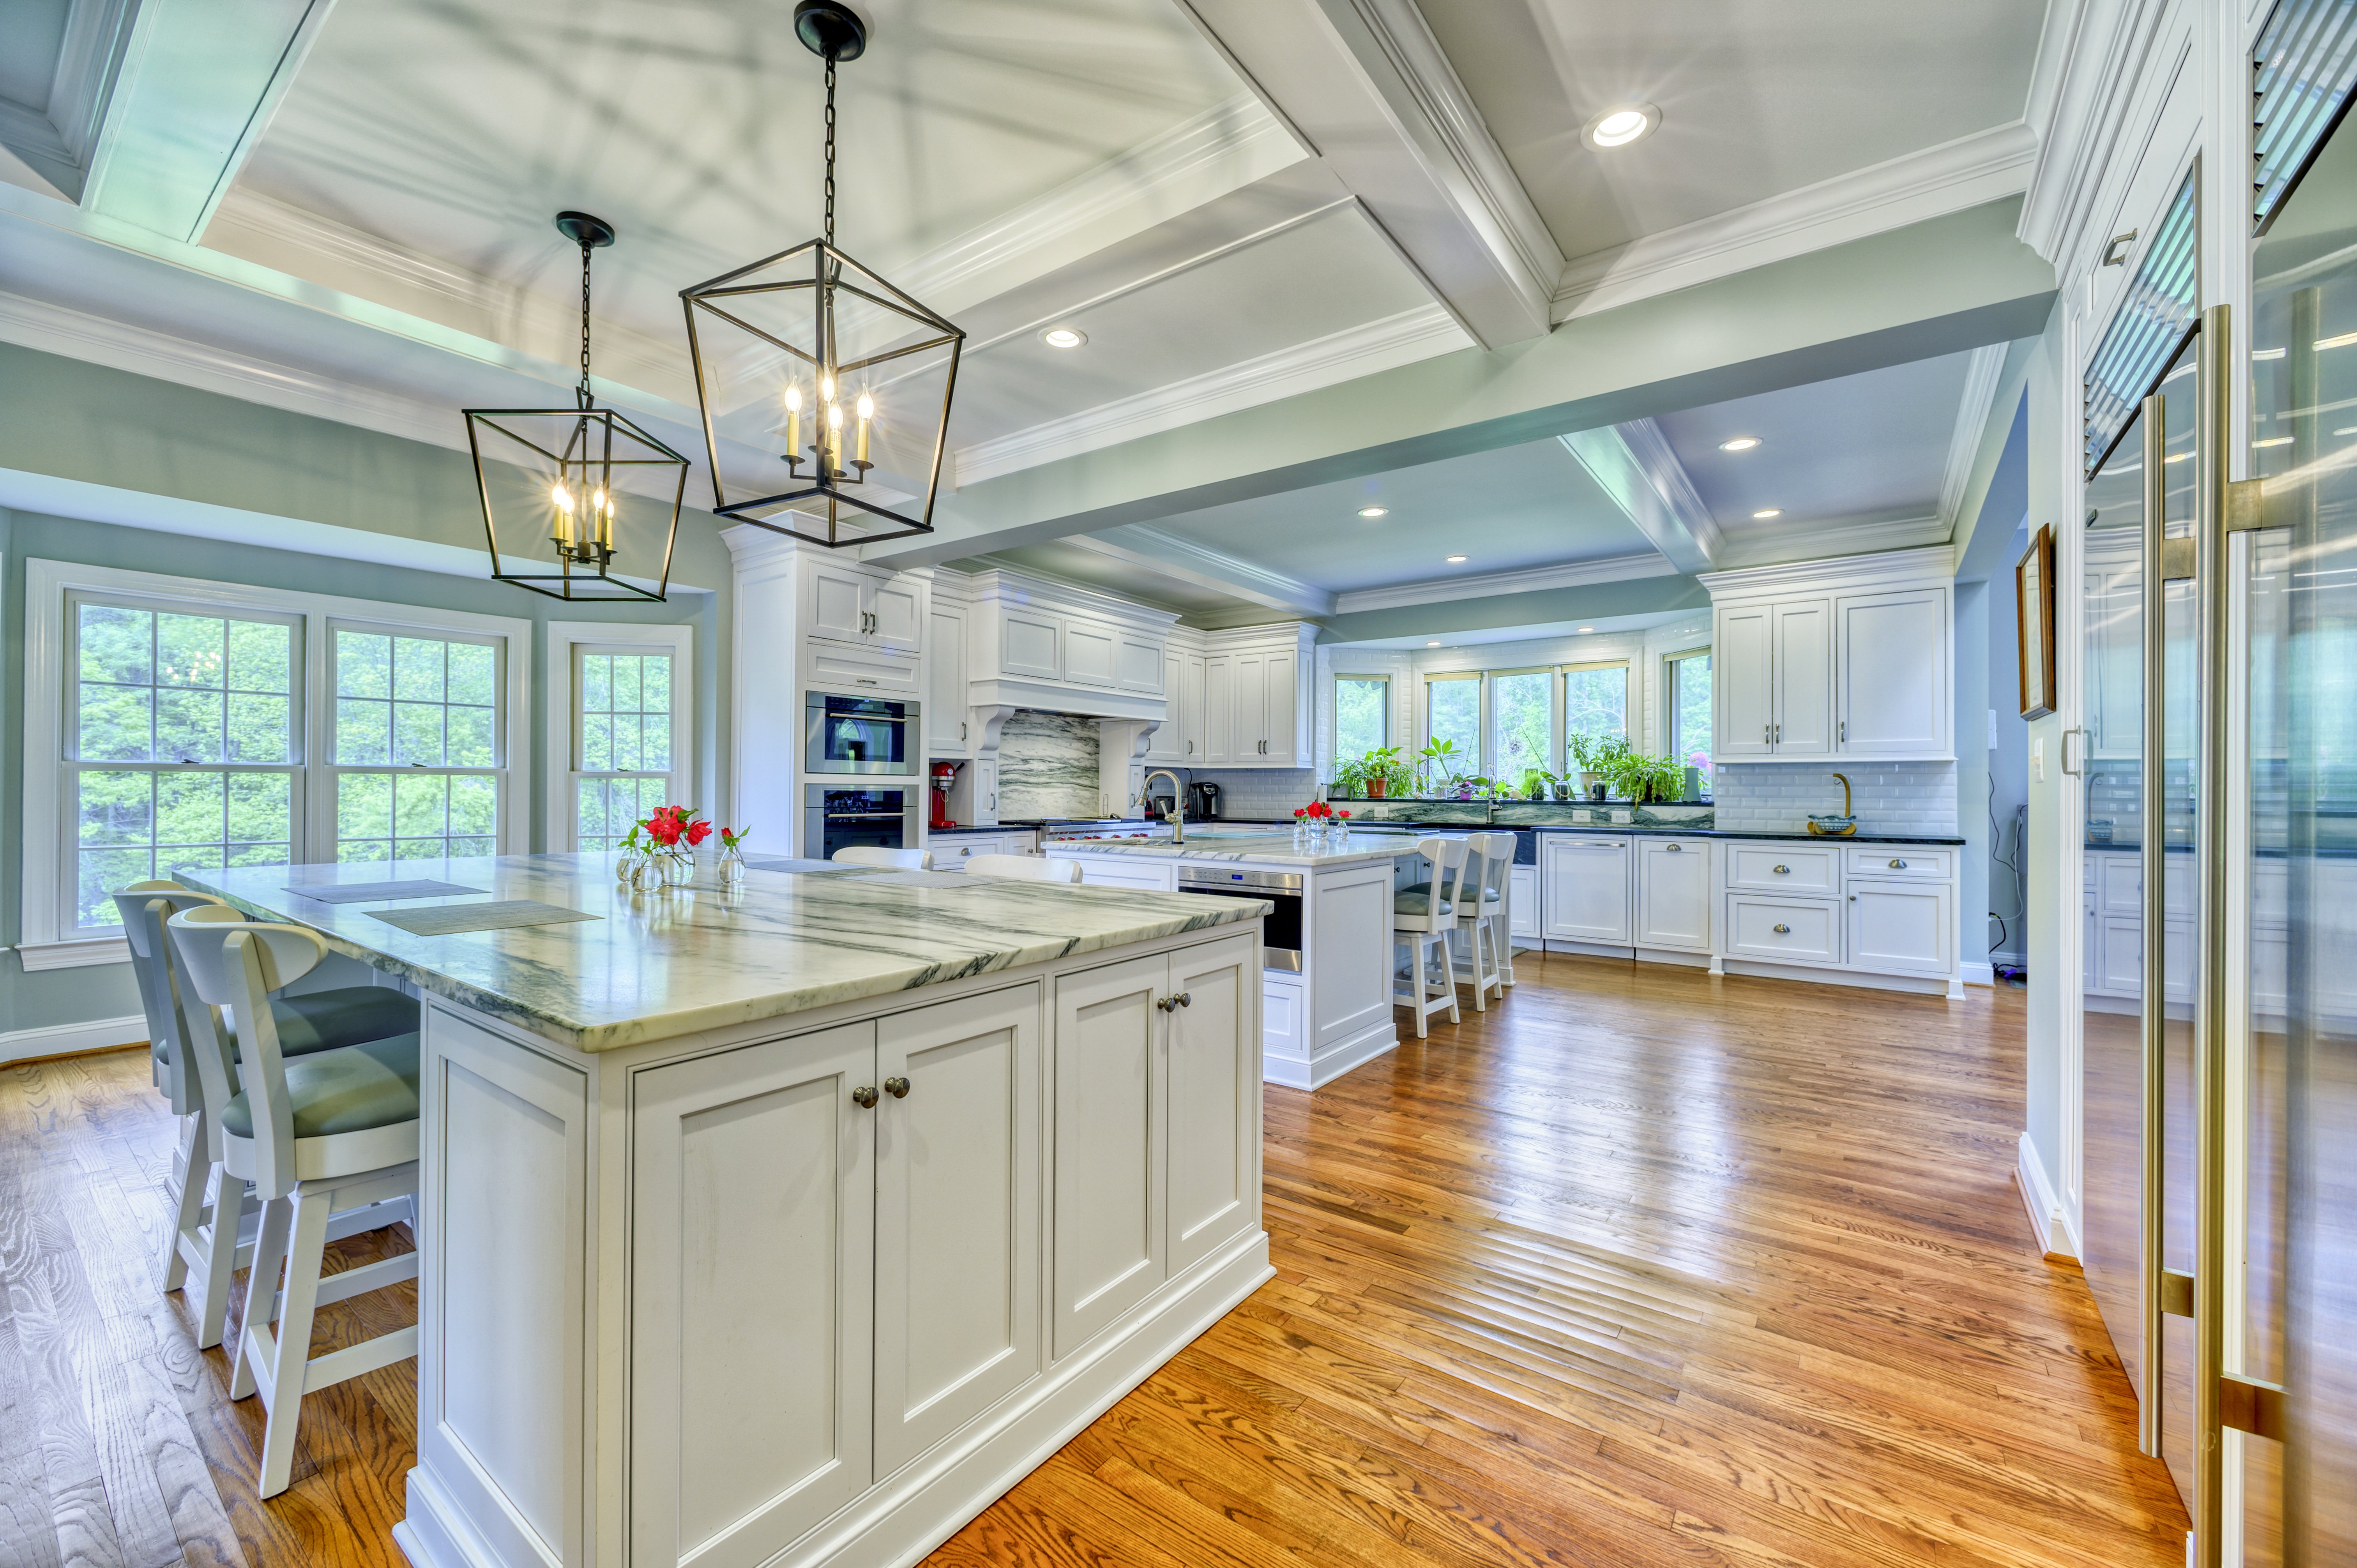 White kitchen island with seating with granite countertops